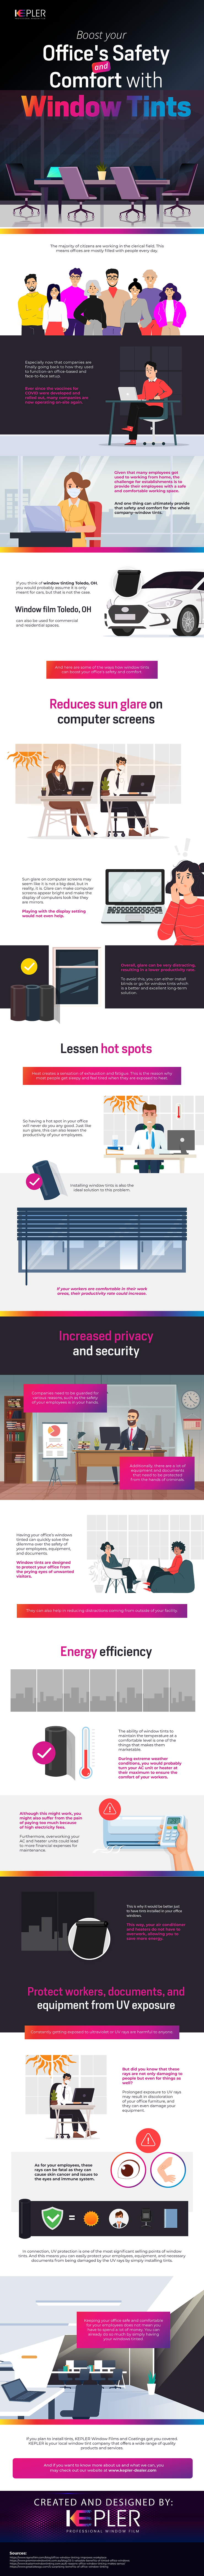 Boost Your Office’s Safety And Comfort With Window Tints - Infographic